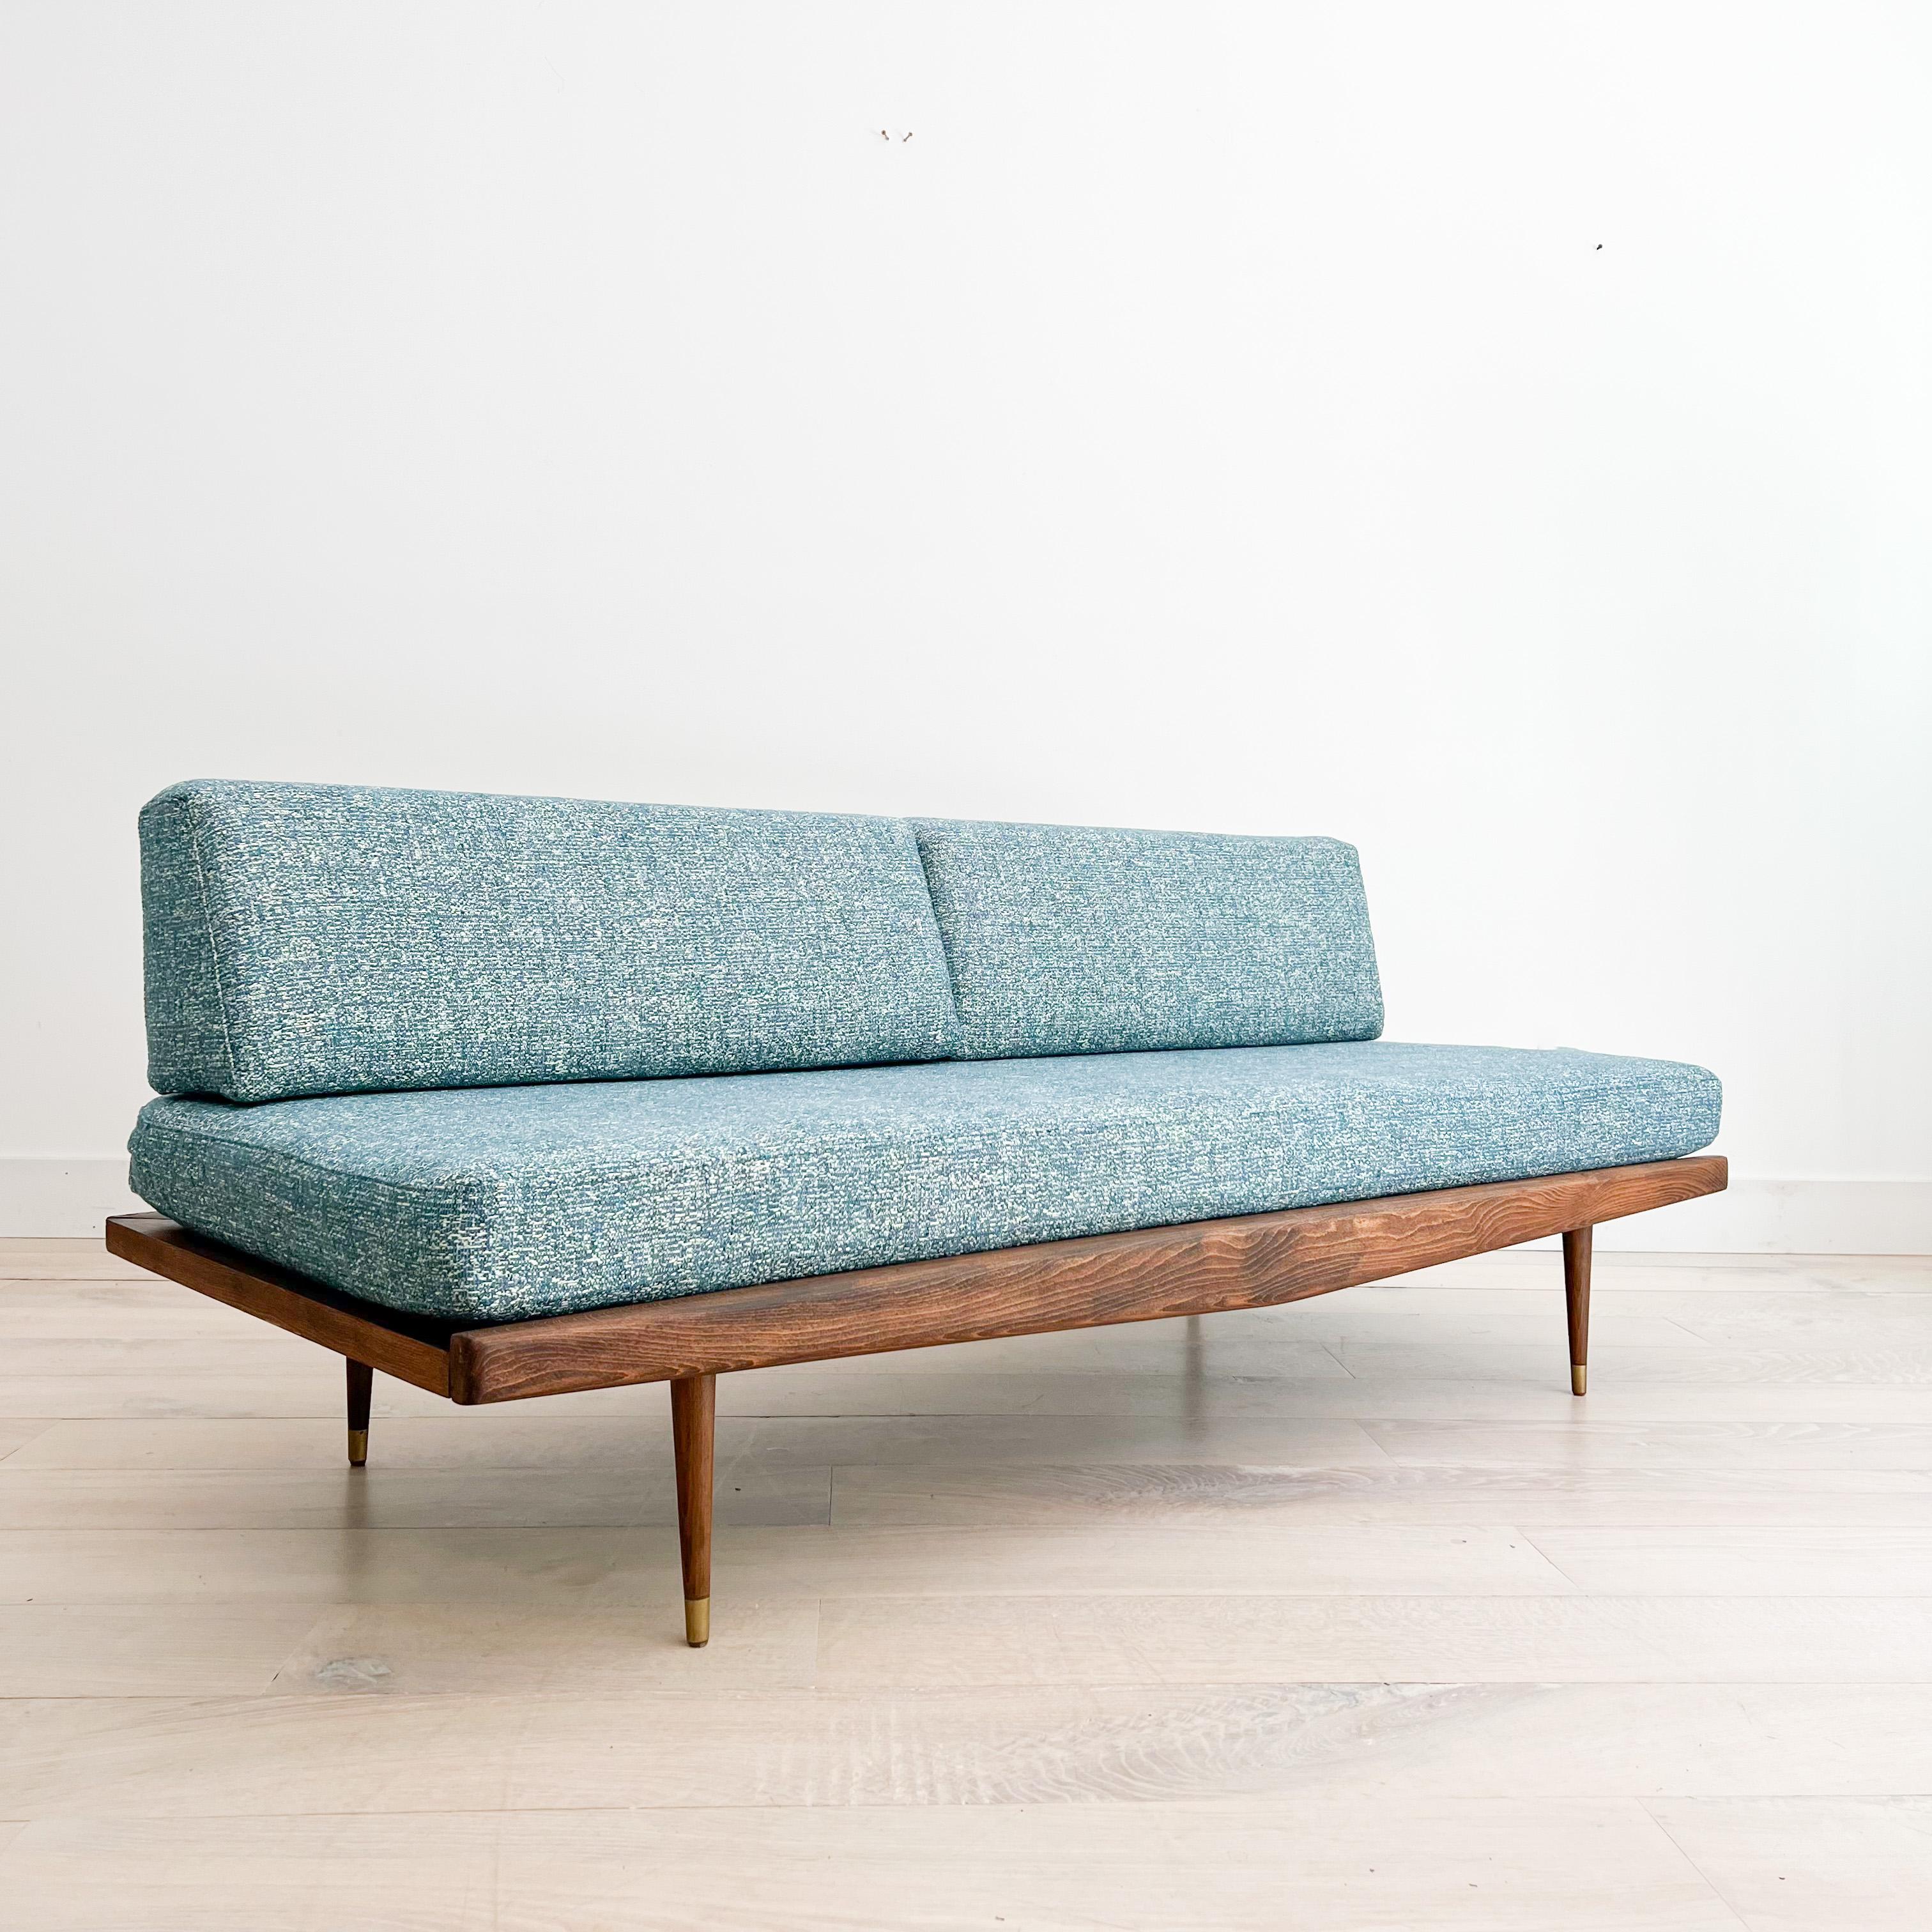 Midcentury Yugoslavian Sofa/Daybed, New Blue Upholstery 5